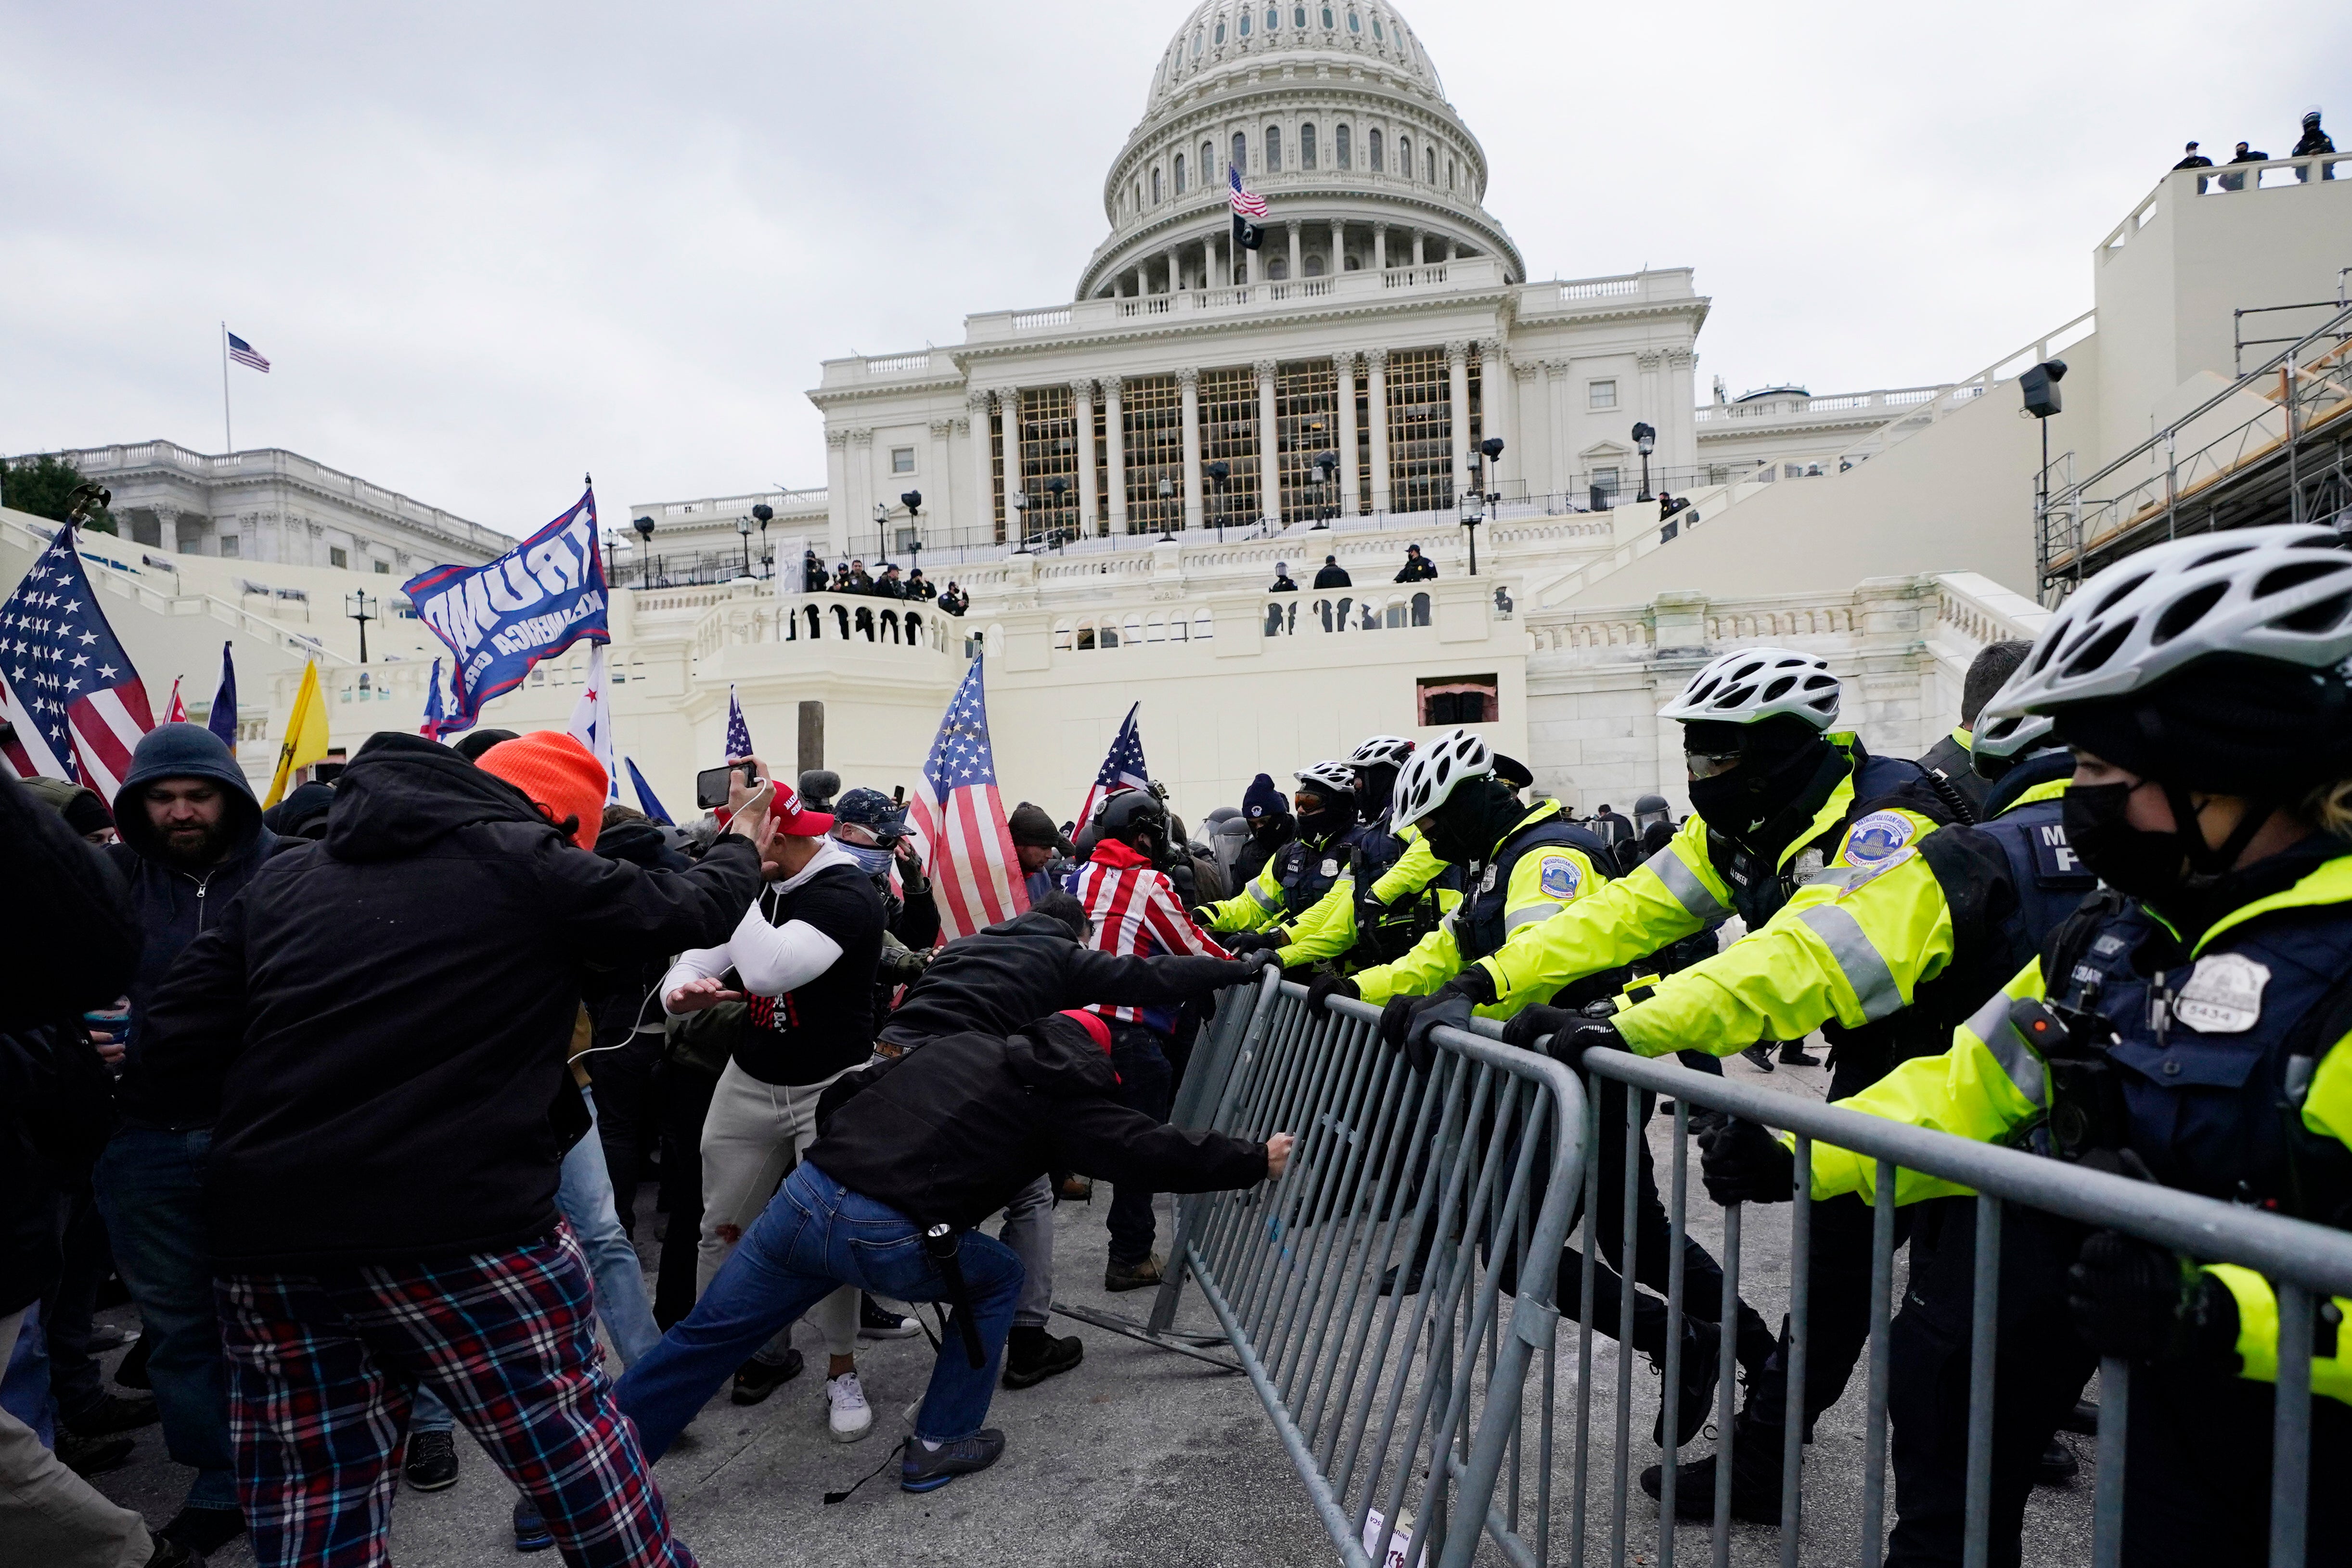 Supporters of Mr Trump attacked police and swarmed the Capitol on 6 January 2021